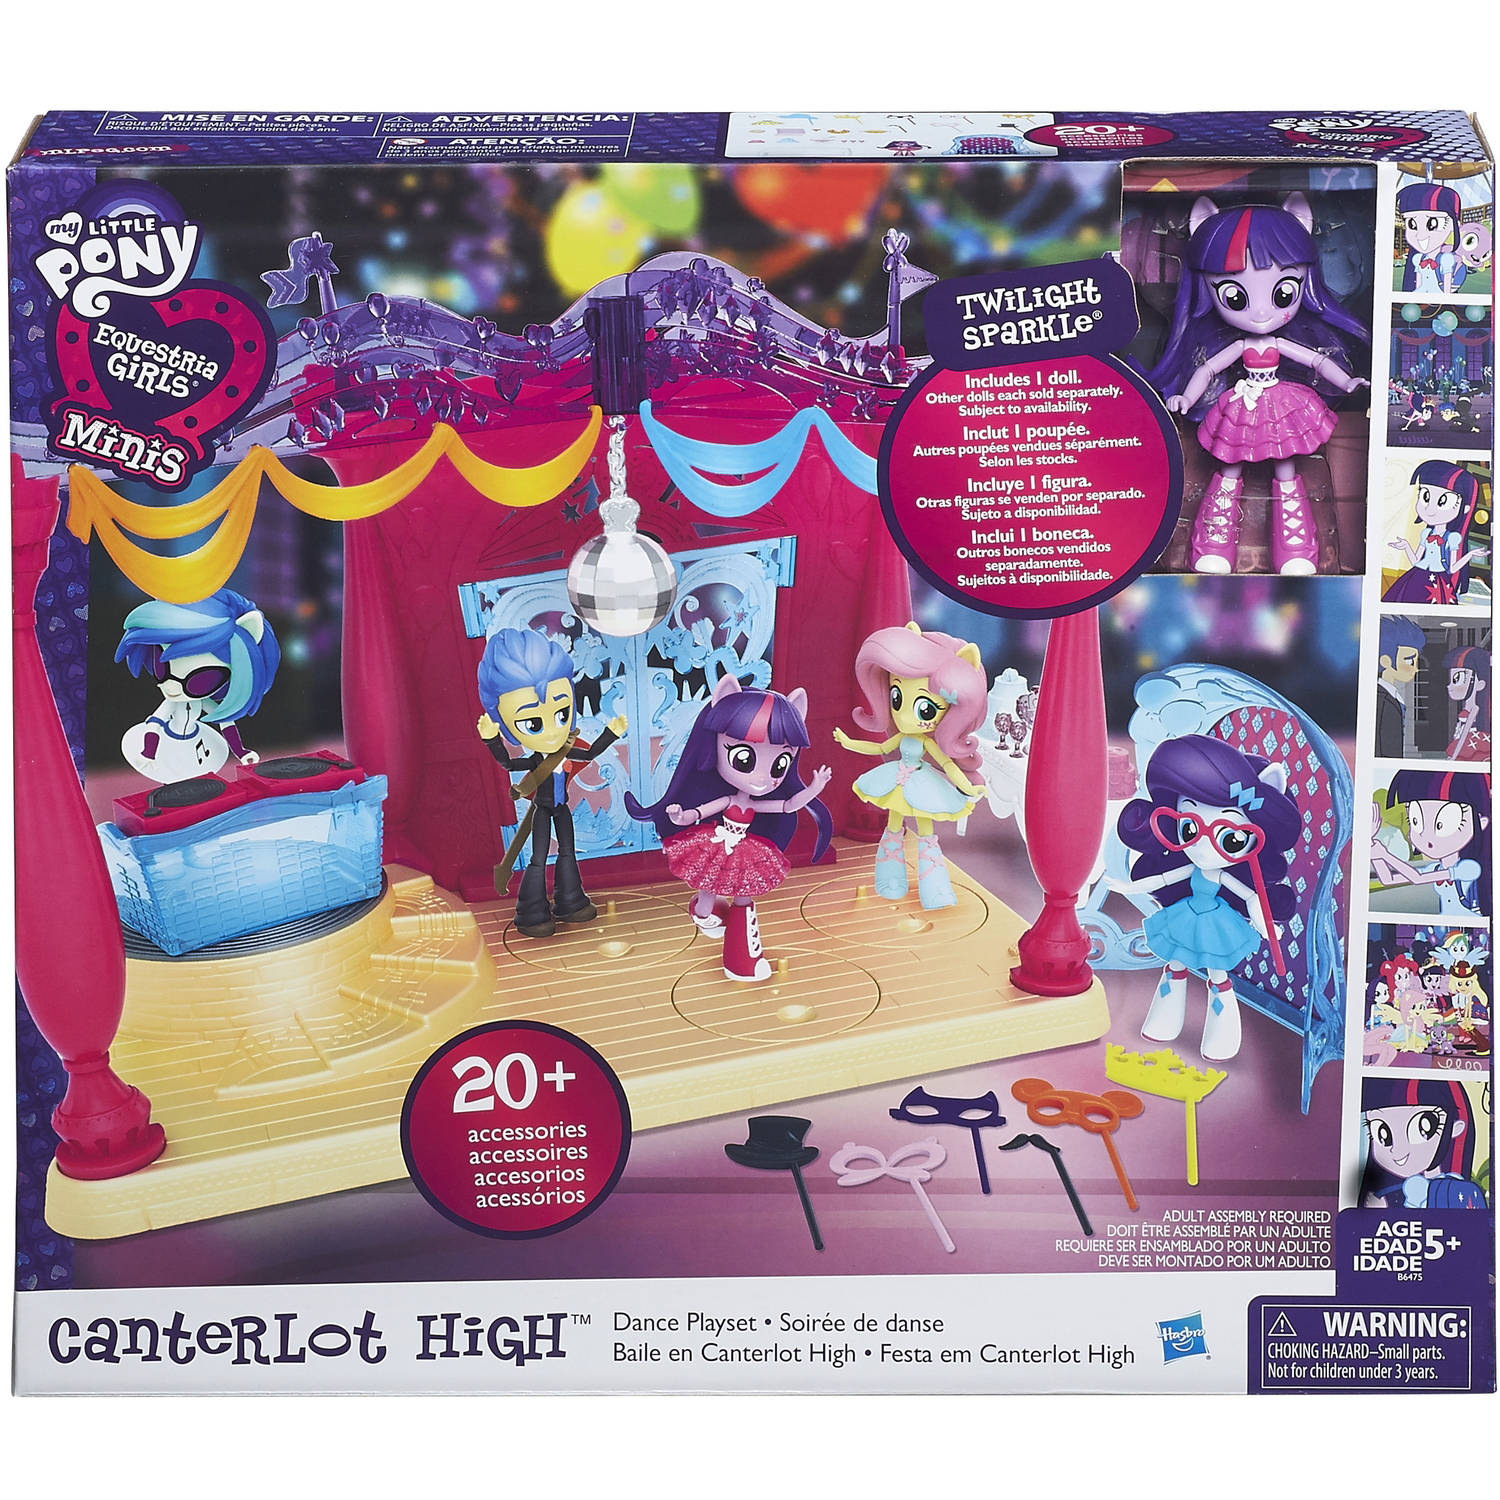 My Little Pony Equestria Girls Minis Canterlot High Dance Playset with Doll - image 2 of 17